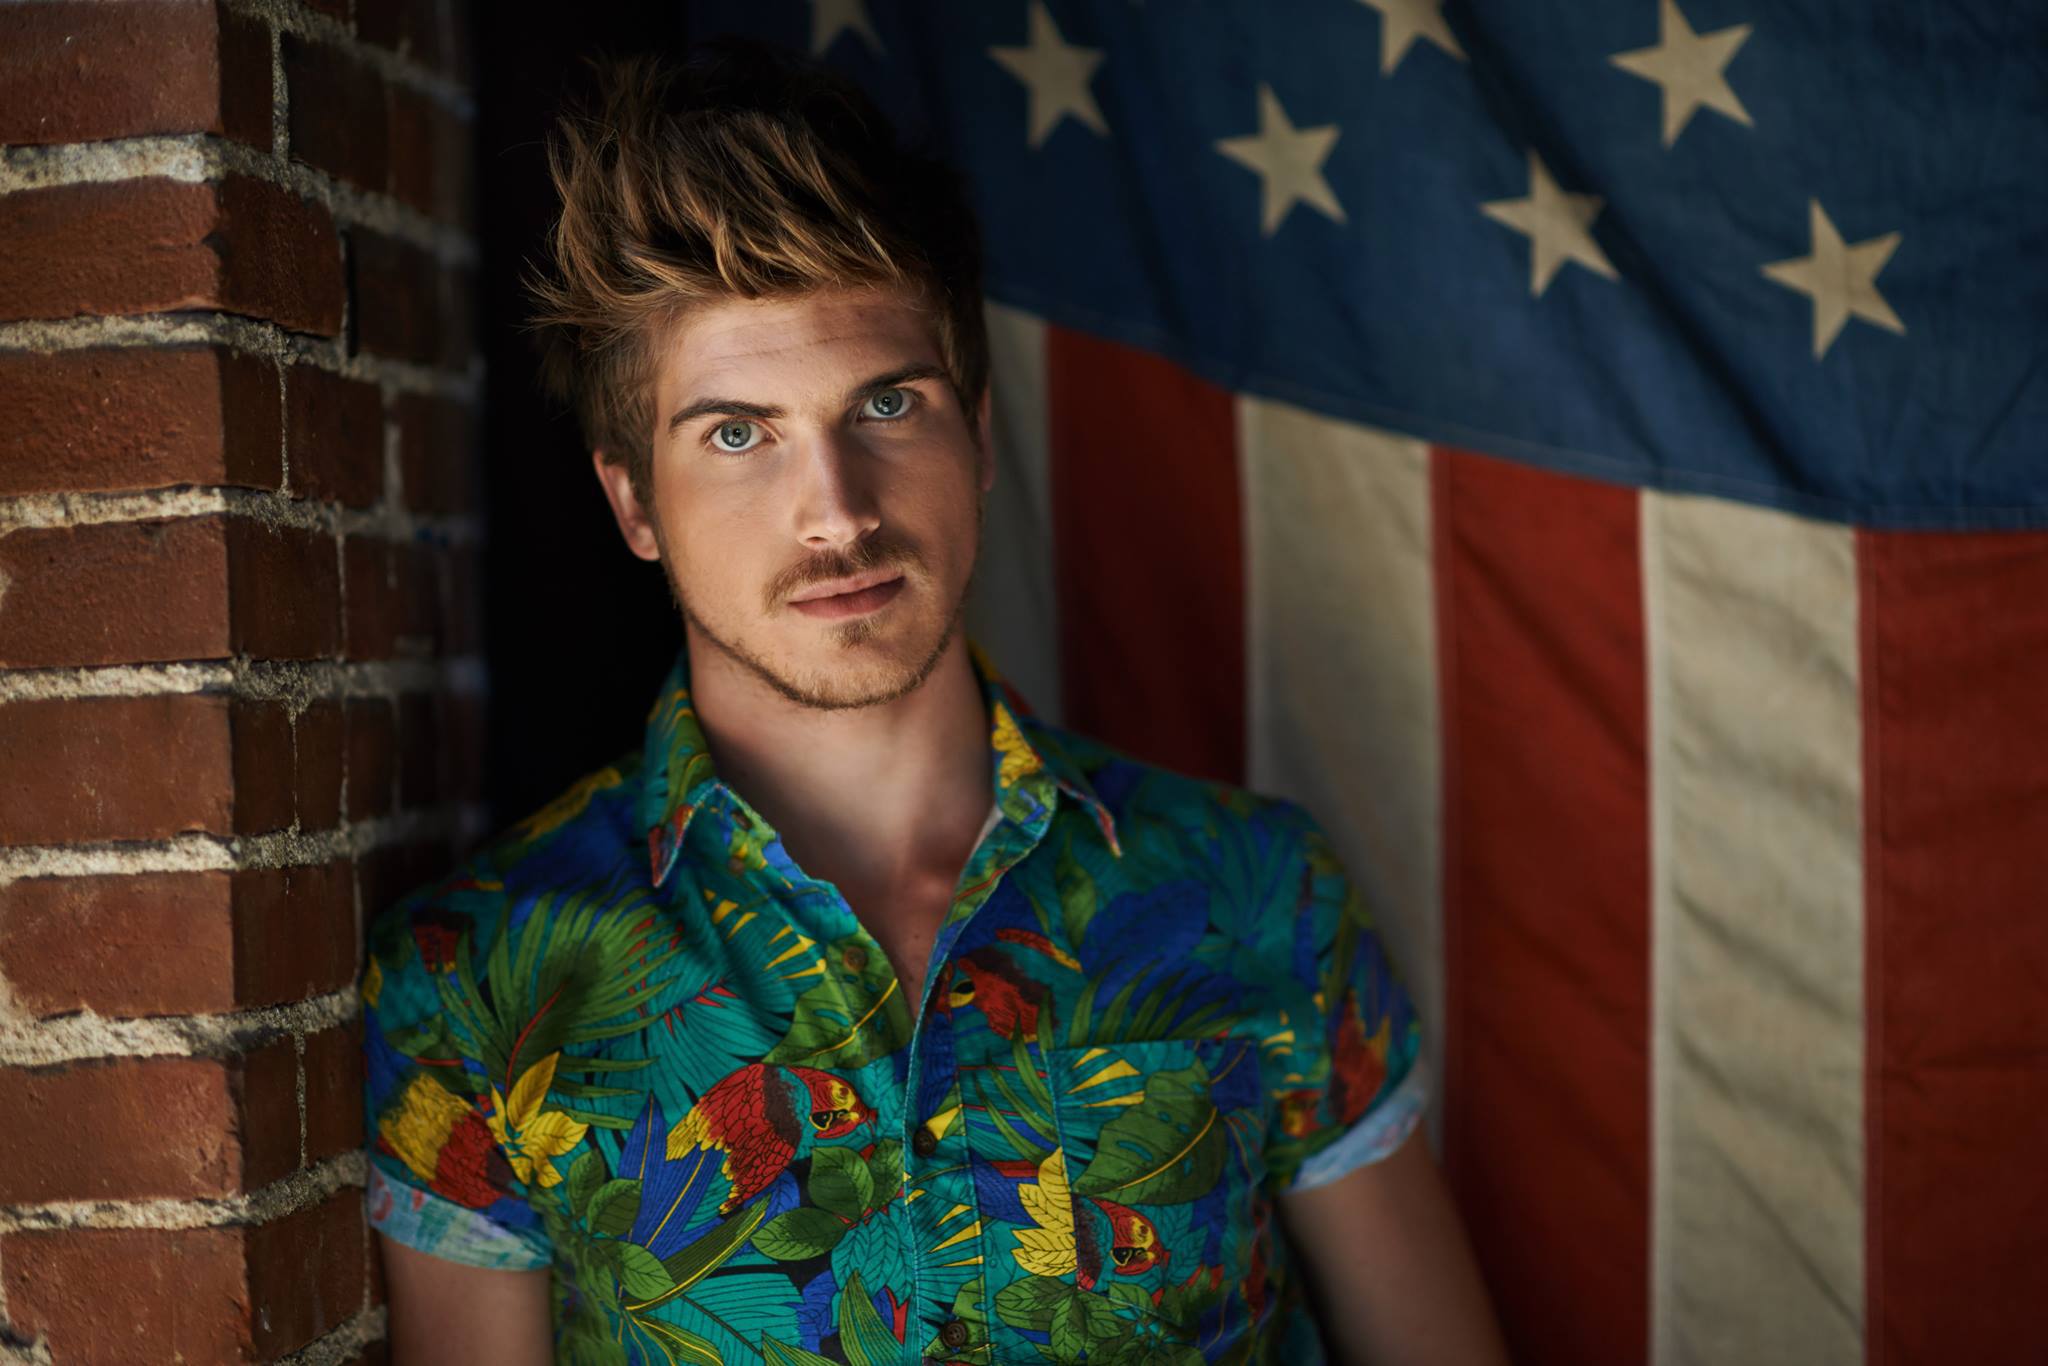 Joey Graceffa Wallpaper Image Photo Picture Background